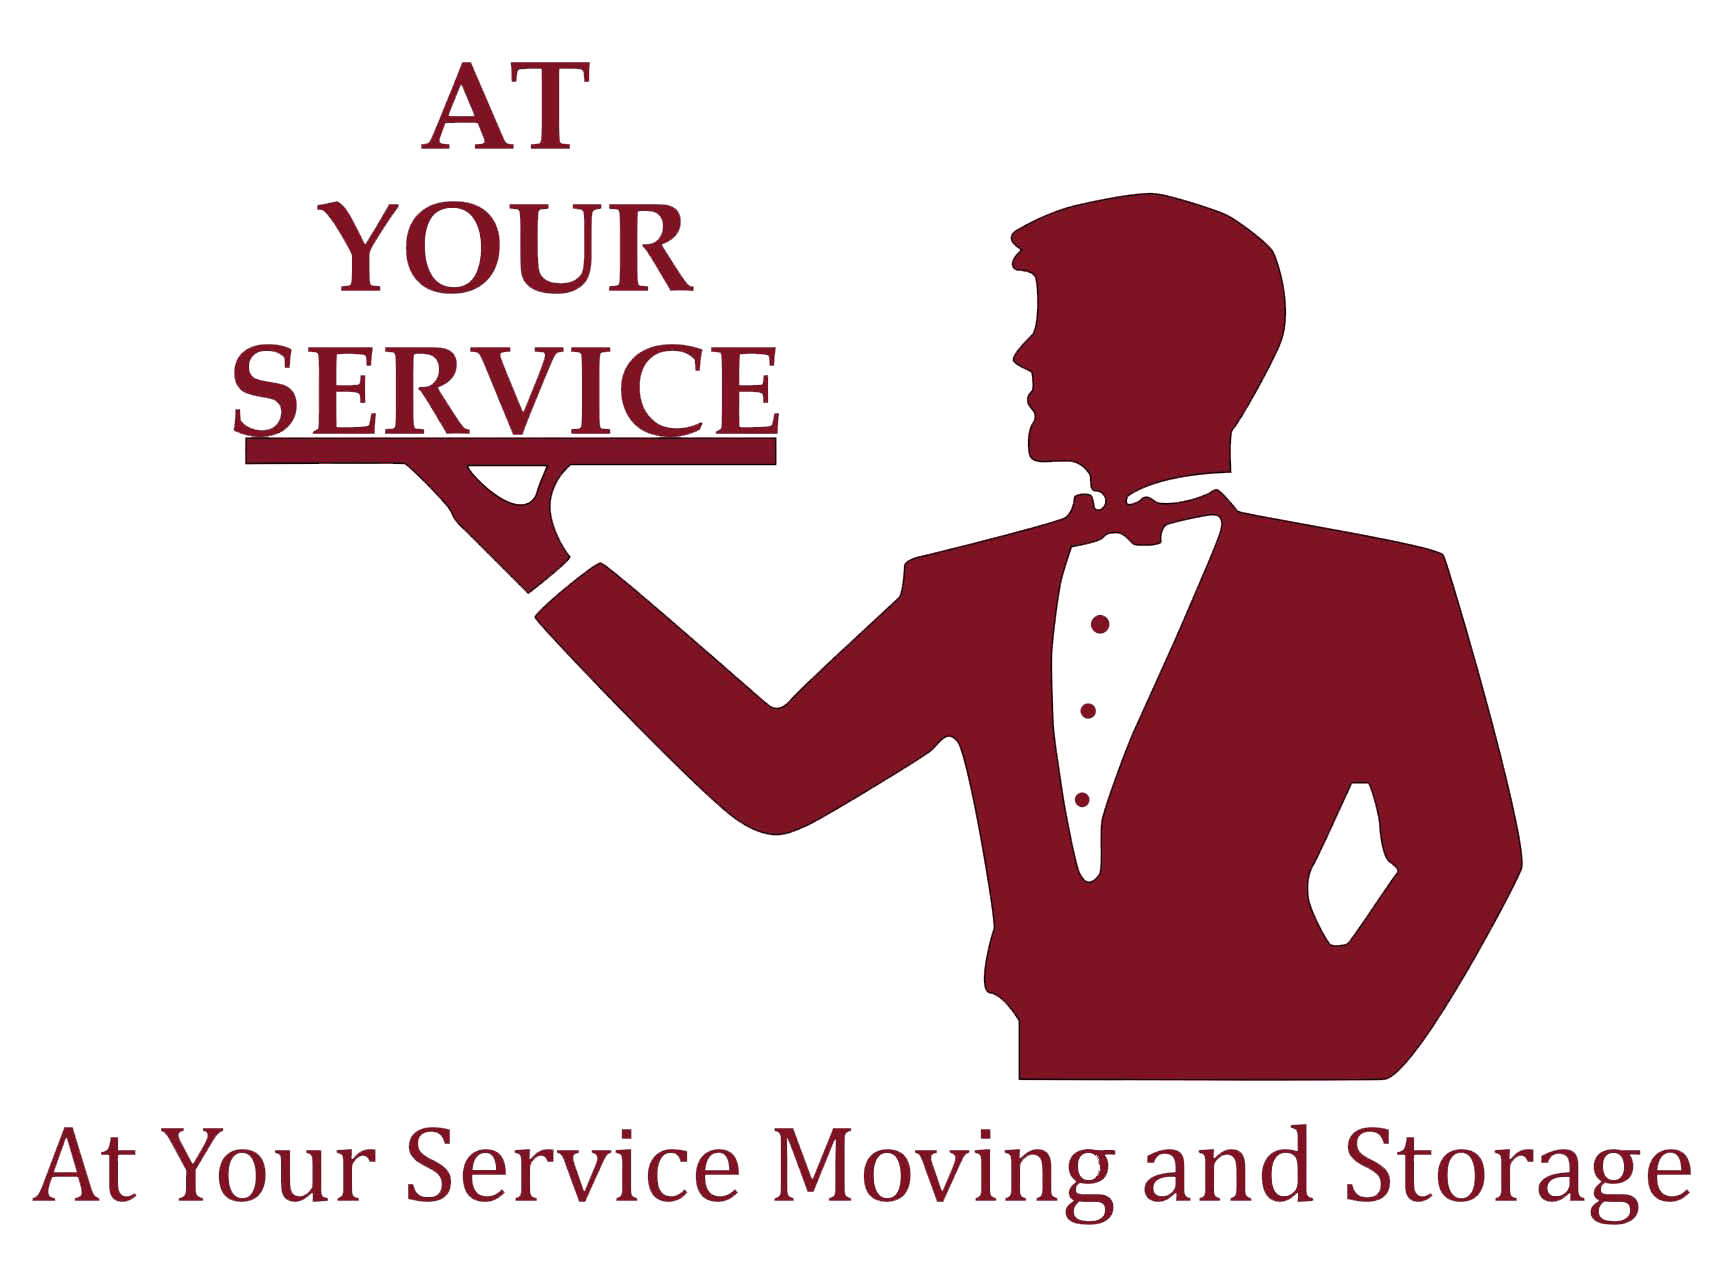 At Your Service Moving and Storage